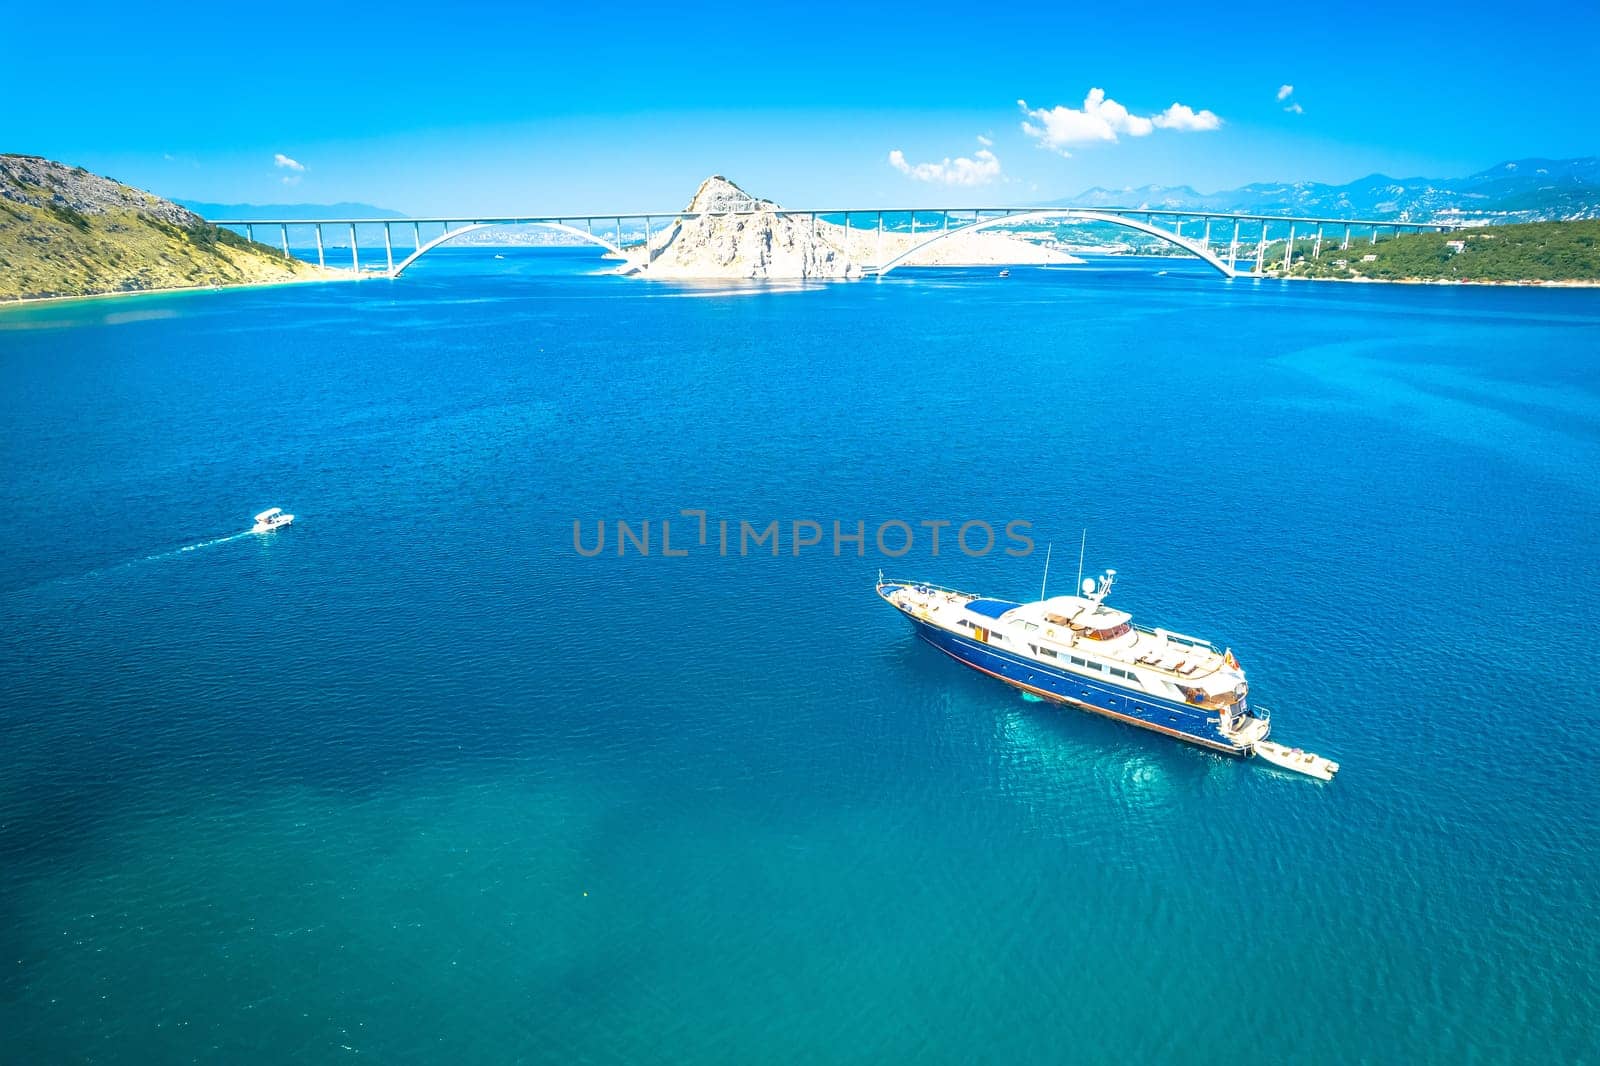 Island of Krk bridge and yacht aerial view by xbrchx